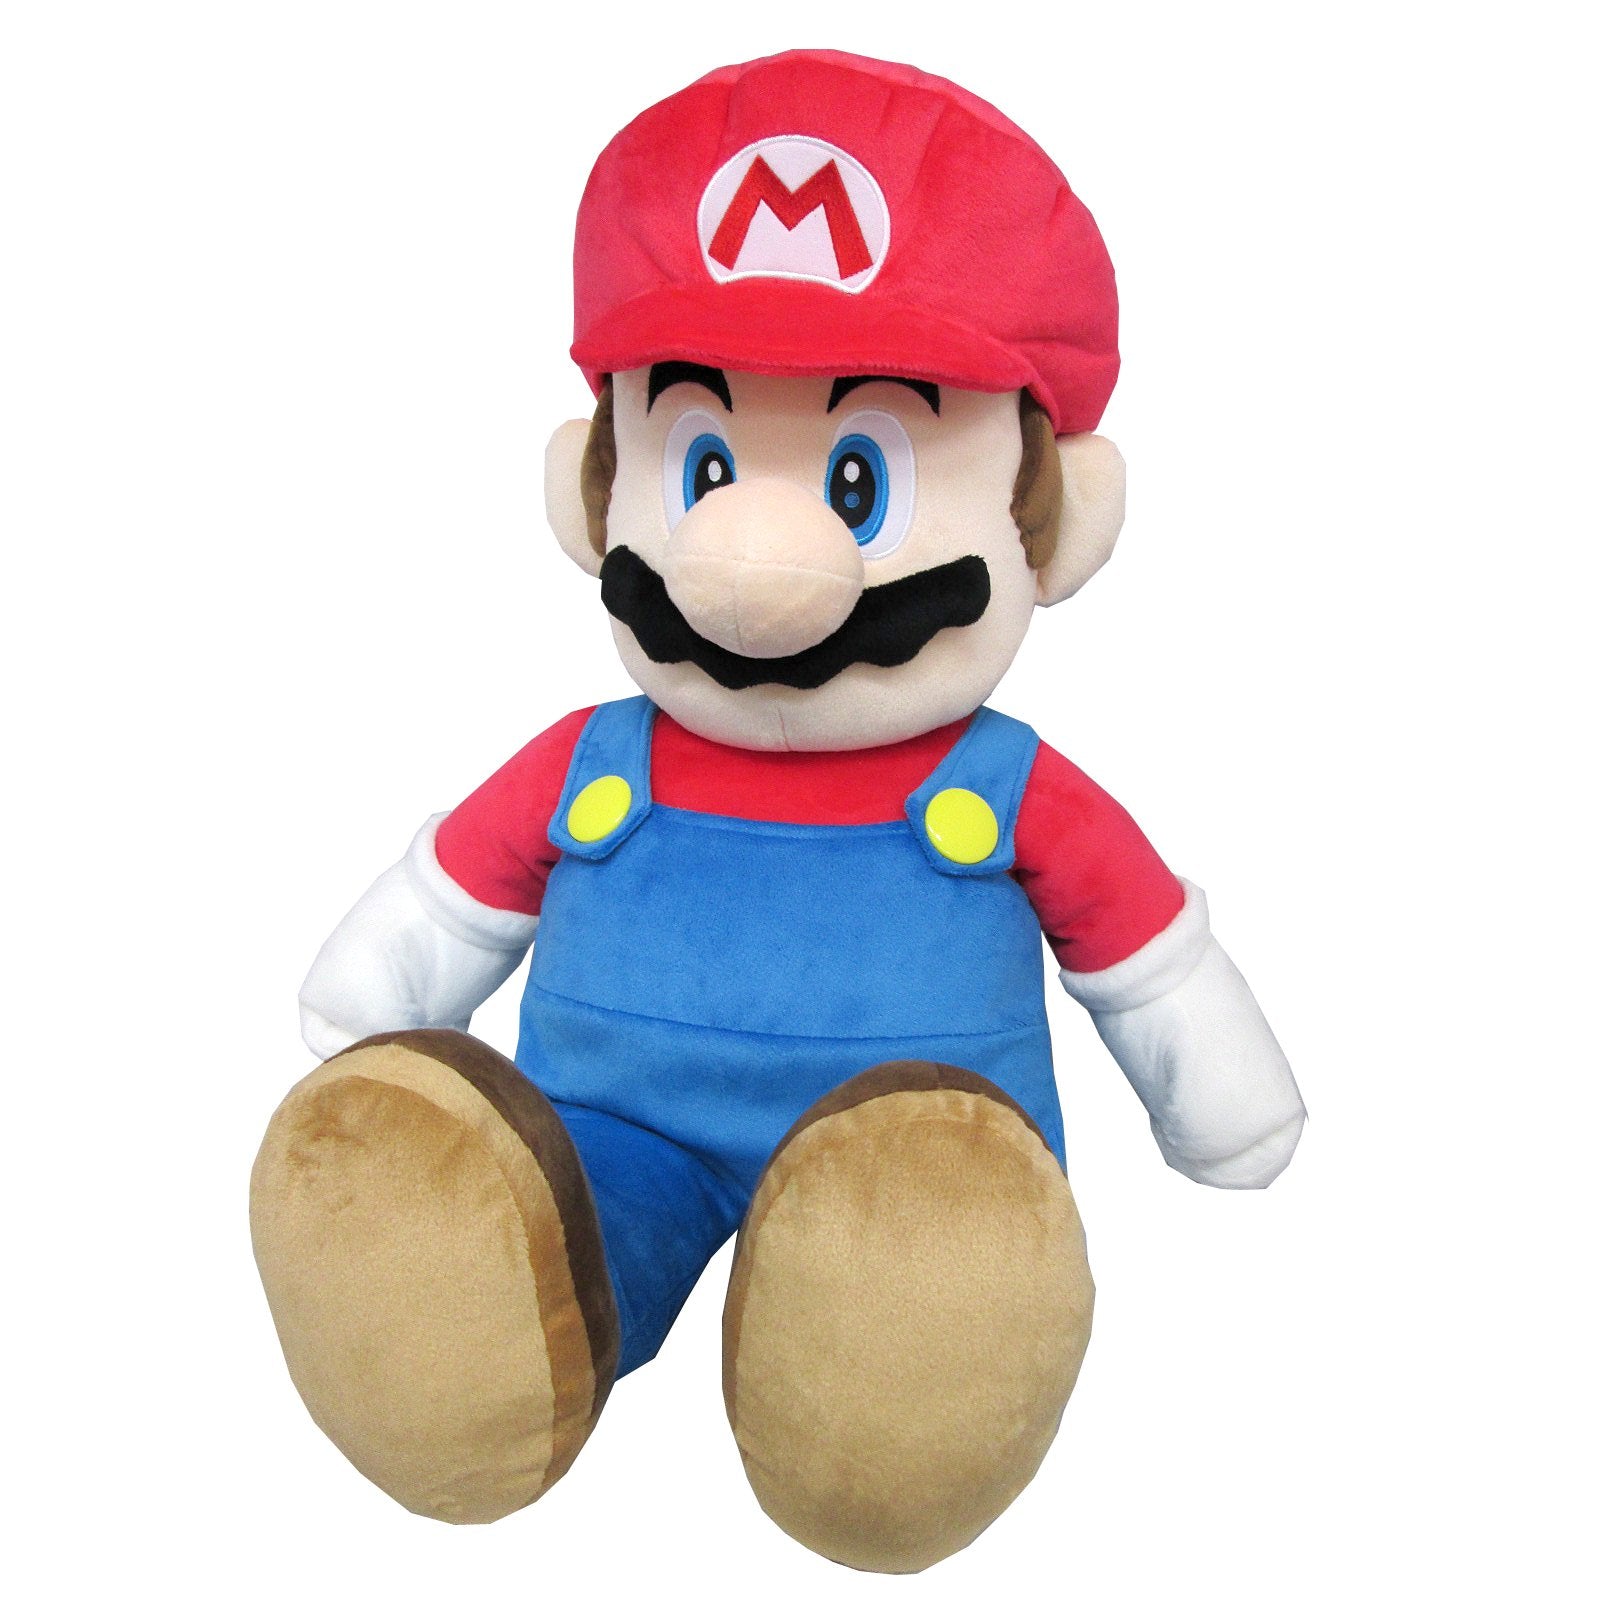 Little Buddy Super Mario All Star Collection (Large) Mario Plush Doll, 24" Super Anime Store 